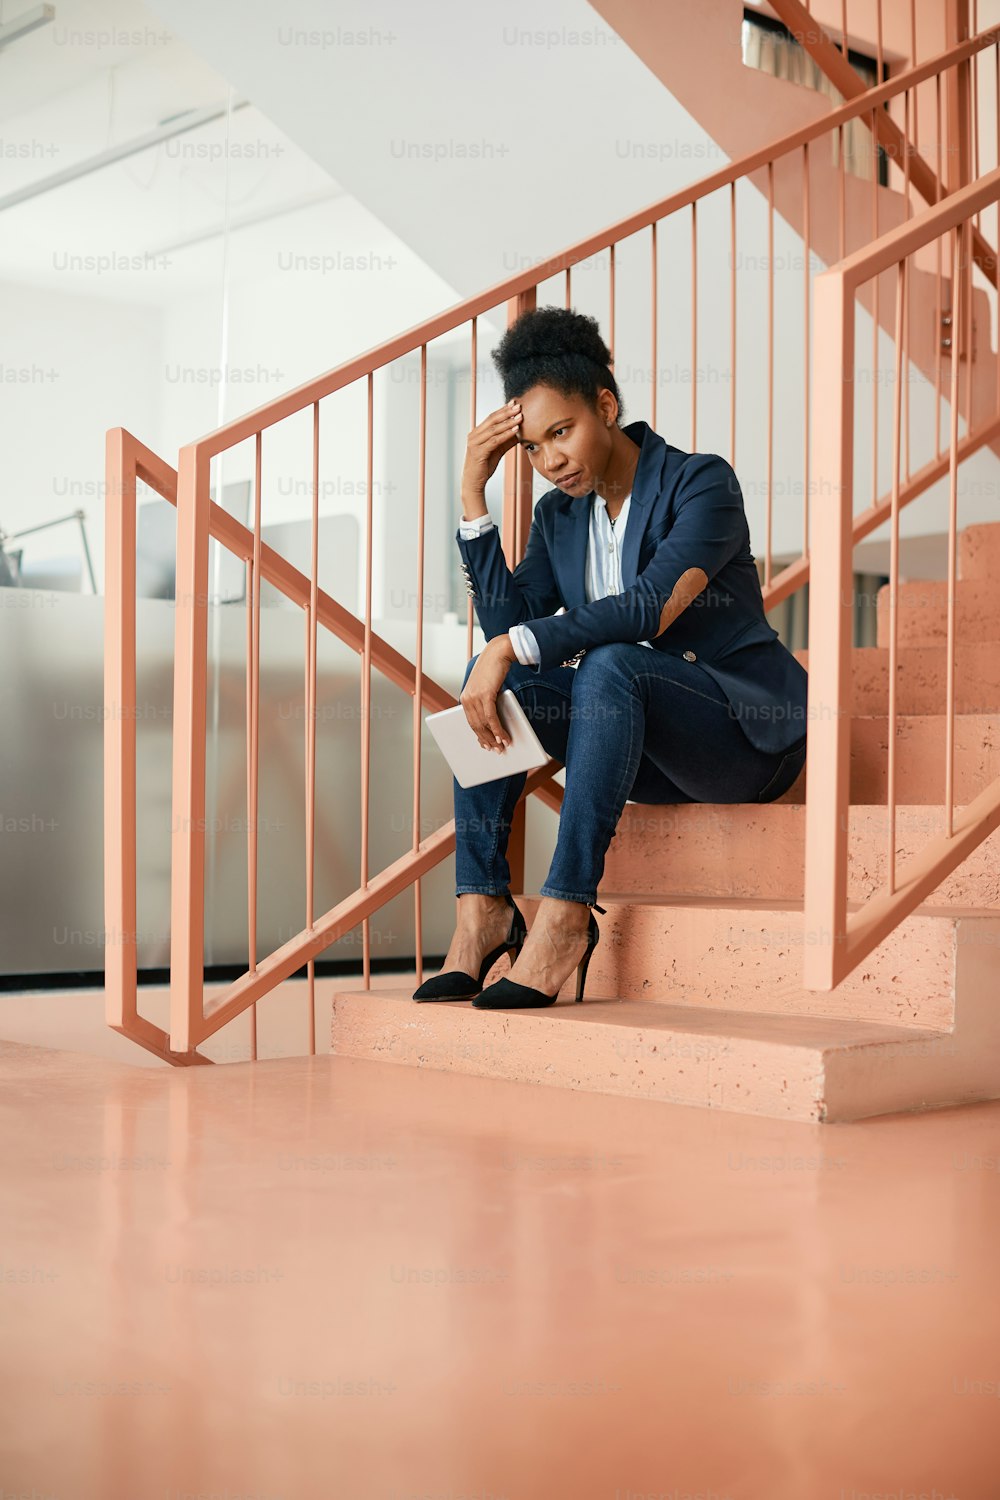 Distraught African American businesswoman thinking of something while sitting on a staircase in hallway. Copy space.